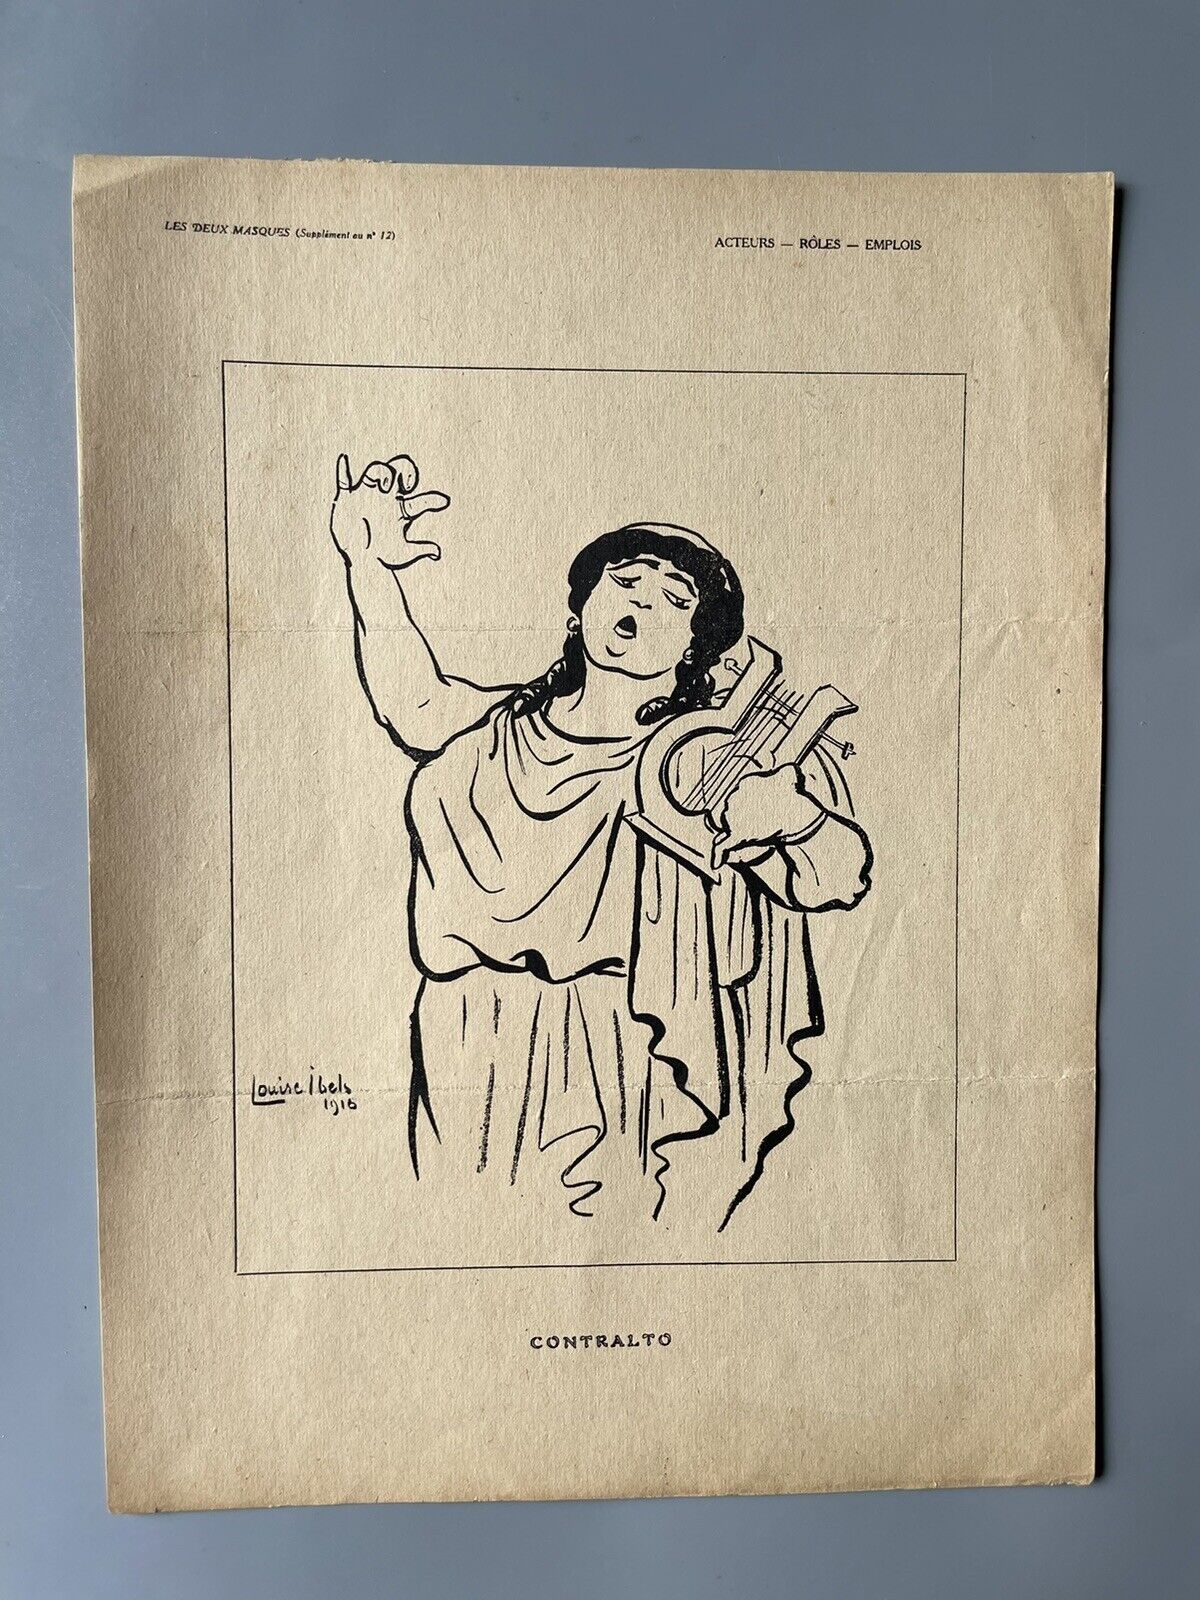 Louise Ibels engraving from the magazine \'les Deux Masques\': CONTRALTO 1916